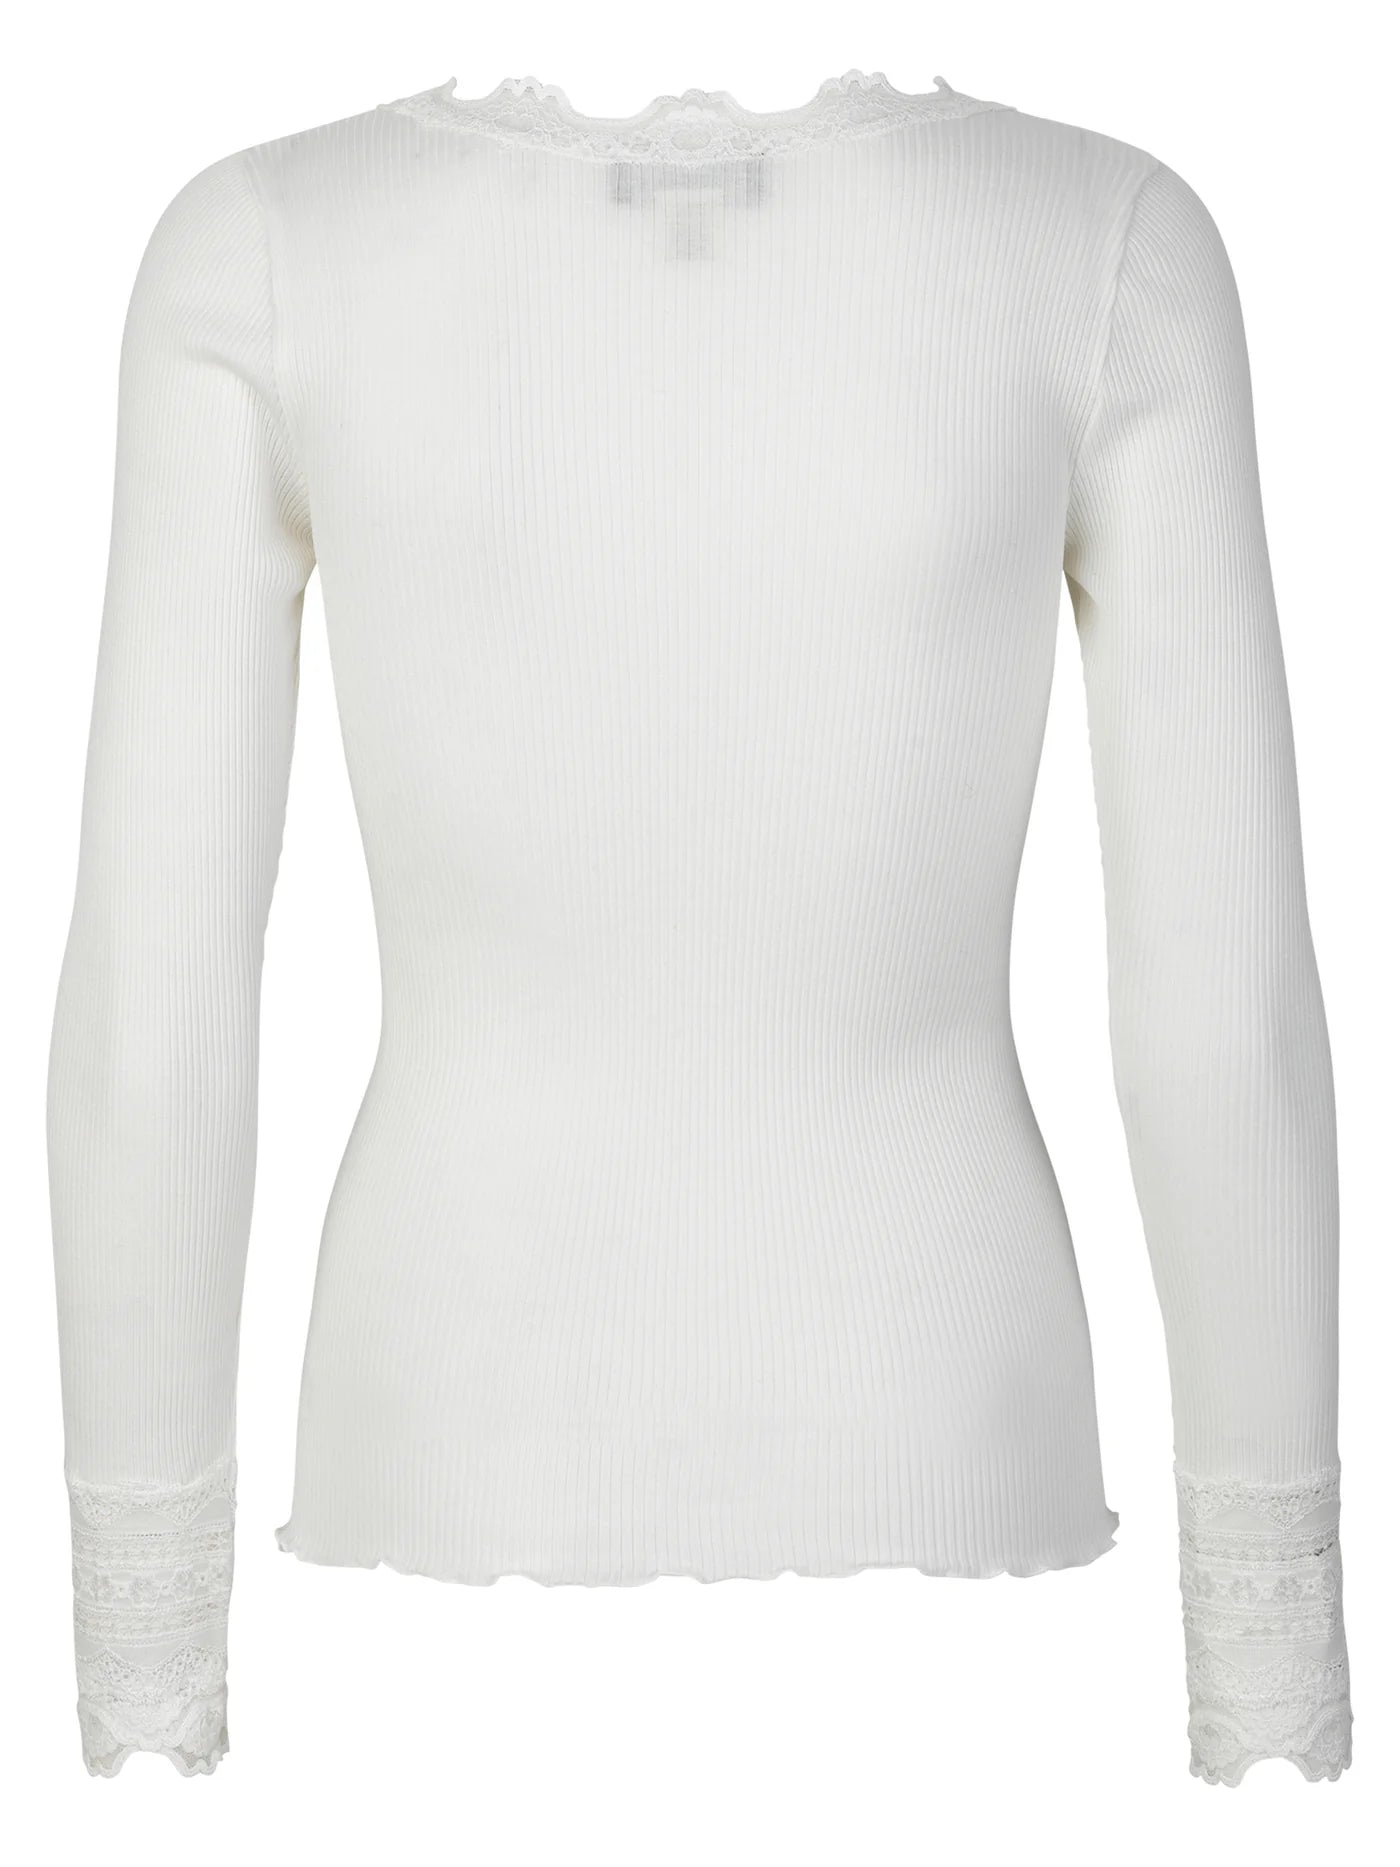 A beautifully designed Rosemunde white Long-Sleeve Silk Lace Top with lace trim.